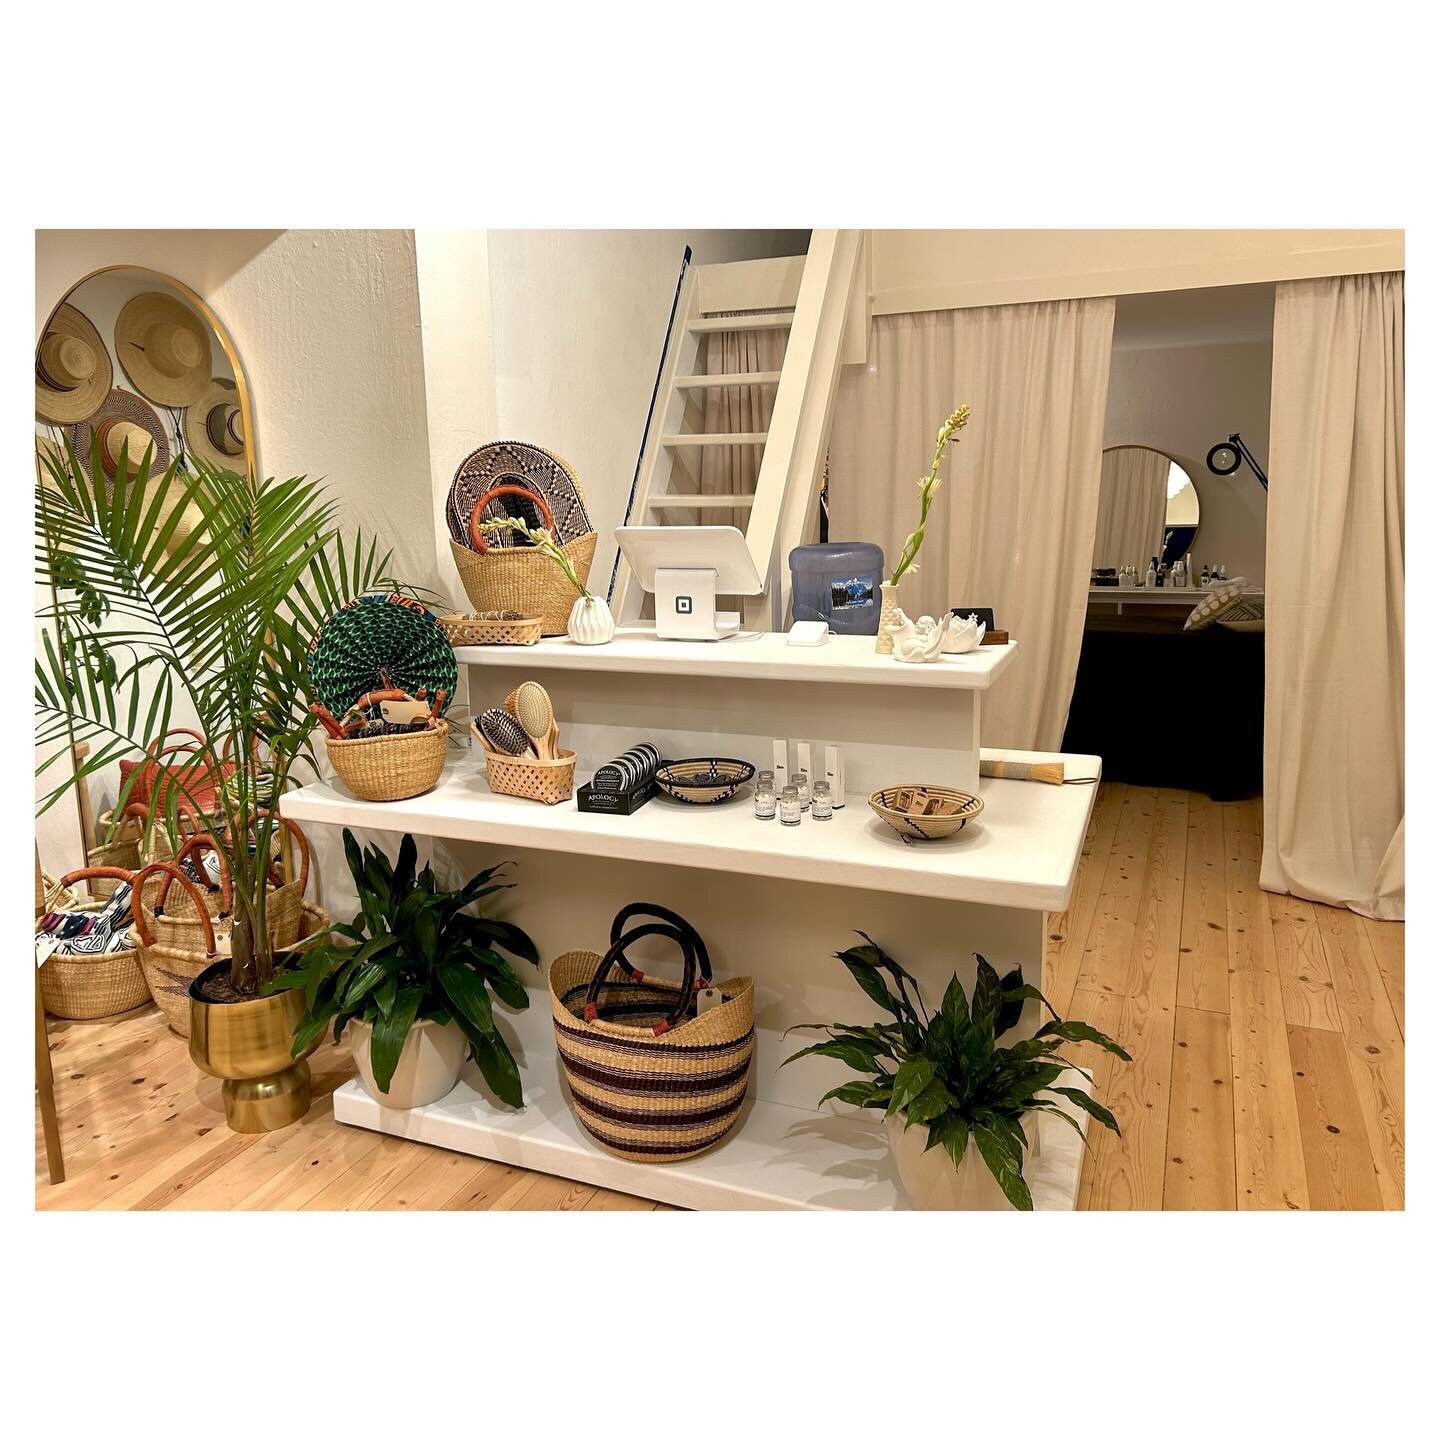 Excited to share that I will now be offering my esthetician services and products in Stinson Beach! 🌊 Come get rejuvenated for the holidays or pamper your loved ones! Phillipa just opened a second Easy Tiger salon &amp; boutique location inside the 